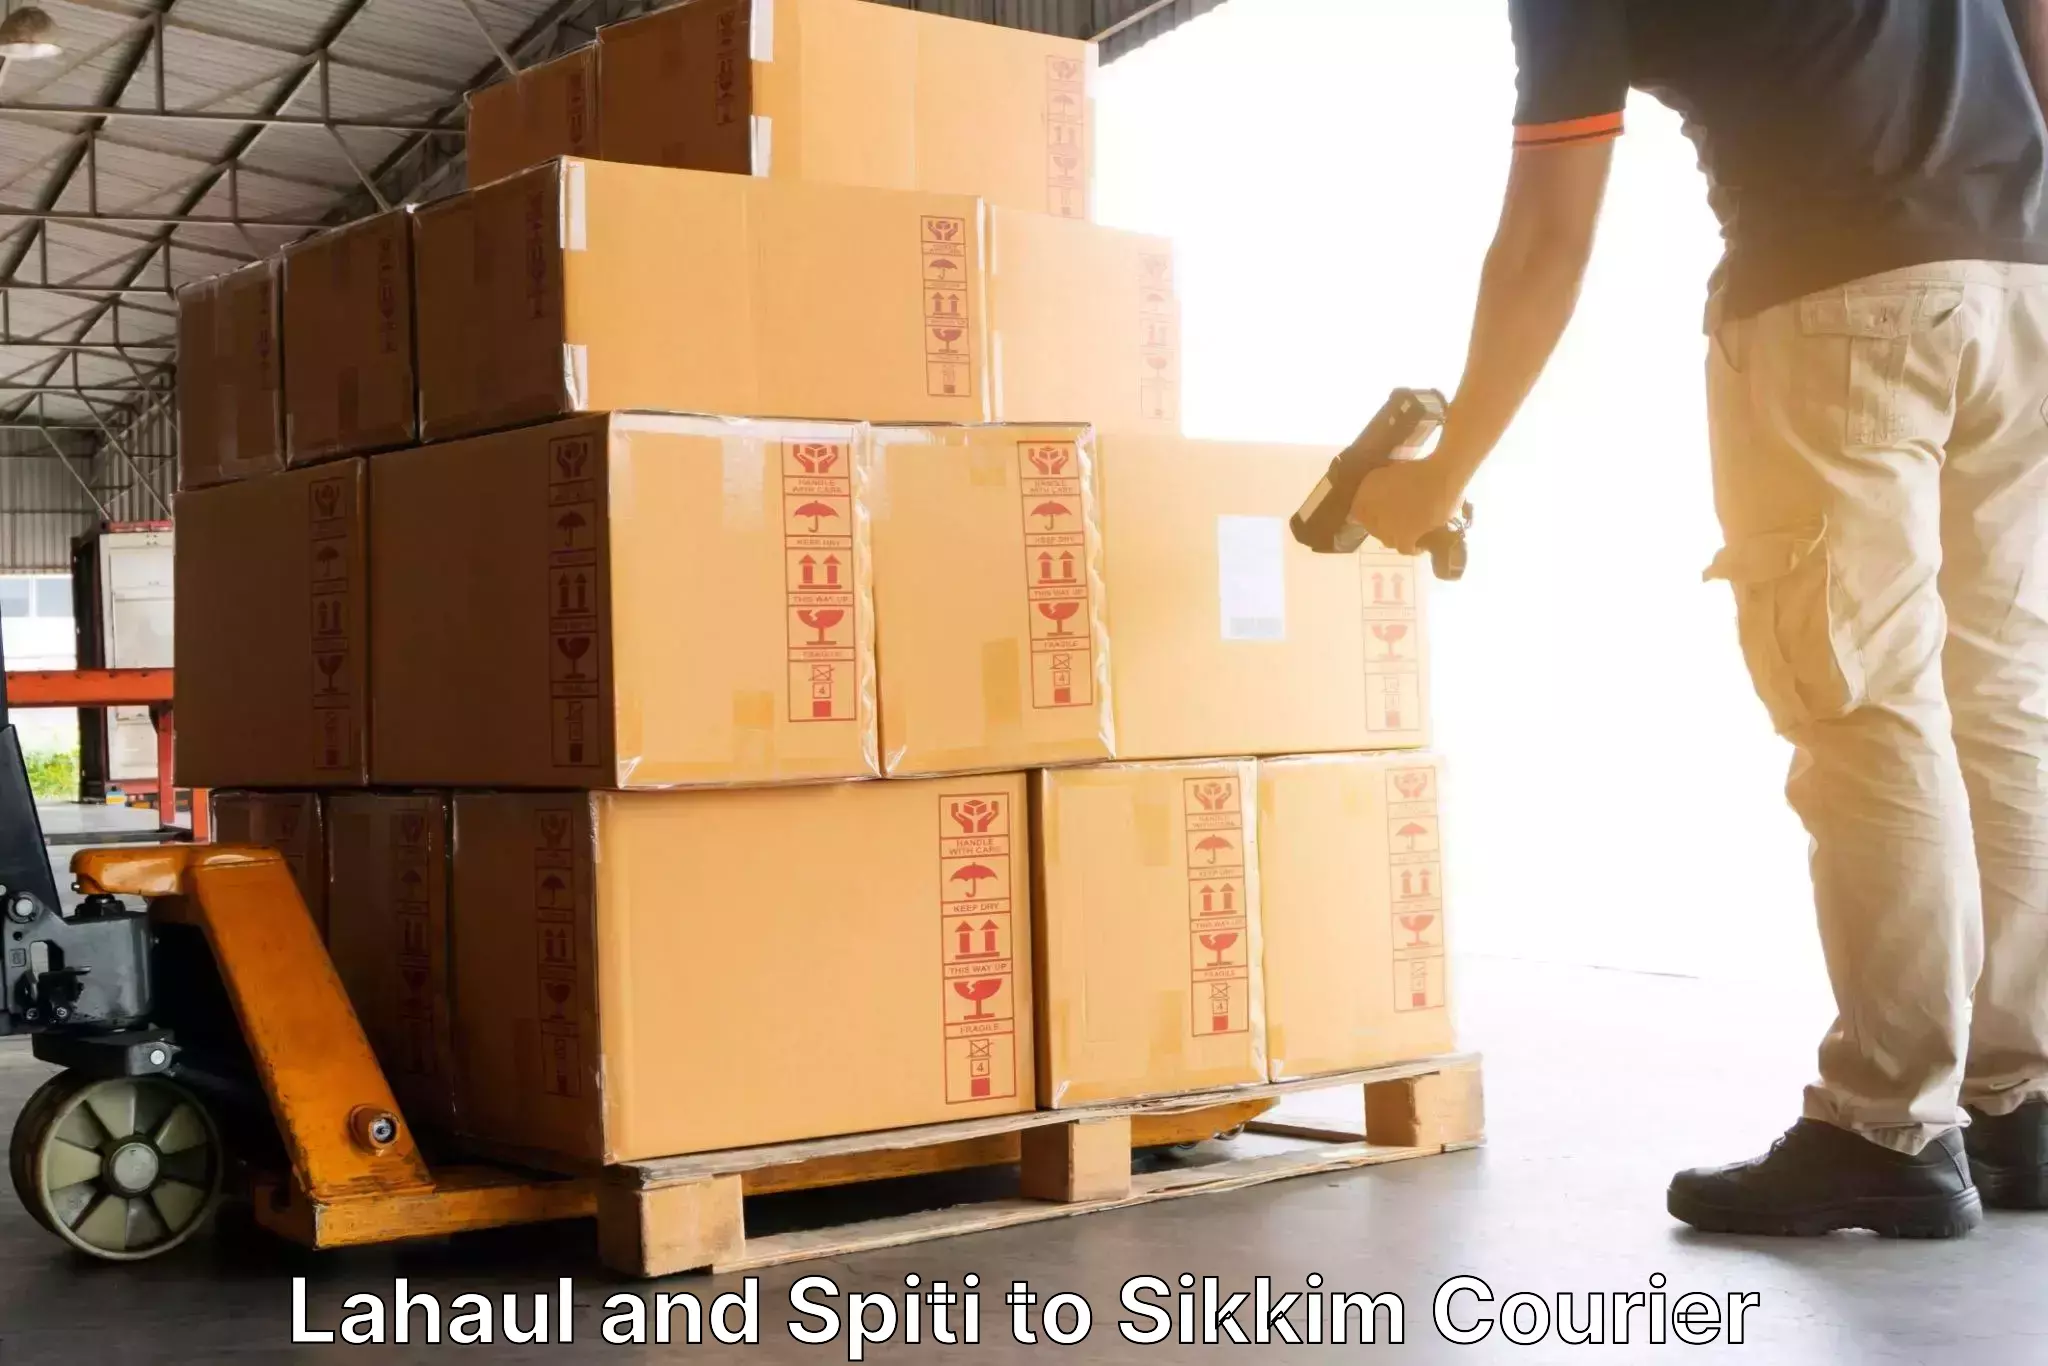 Efficient courier operations Lahaul and Spiti to East Sikkim